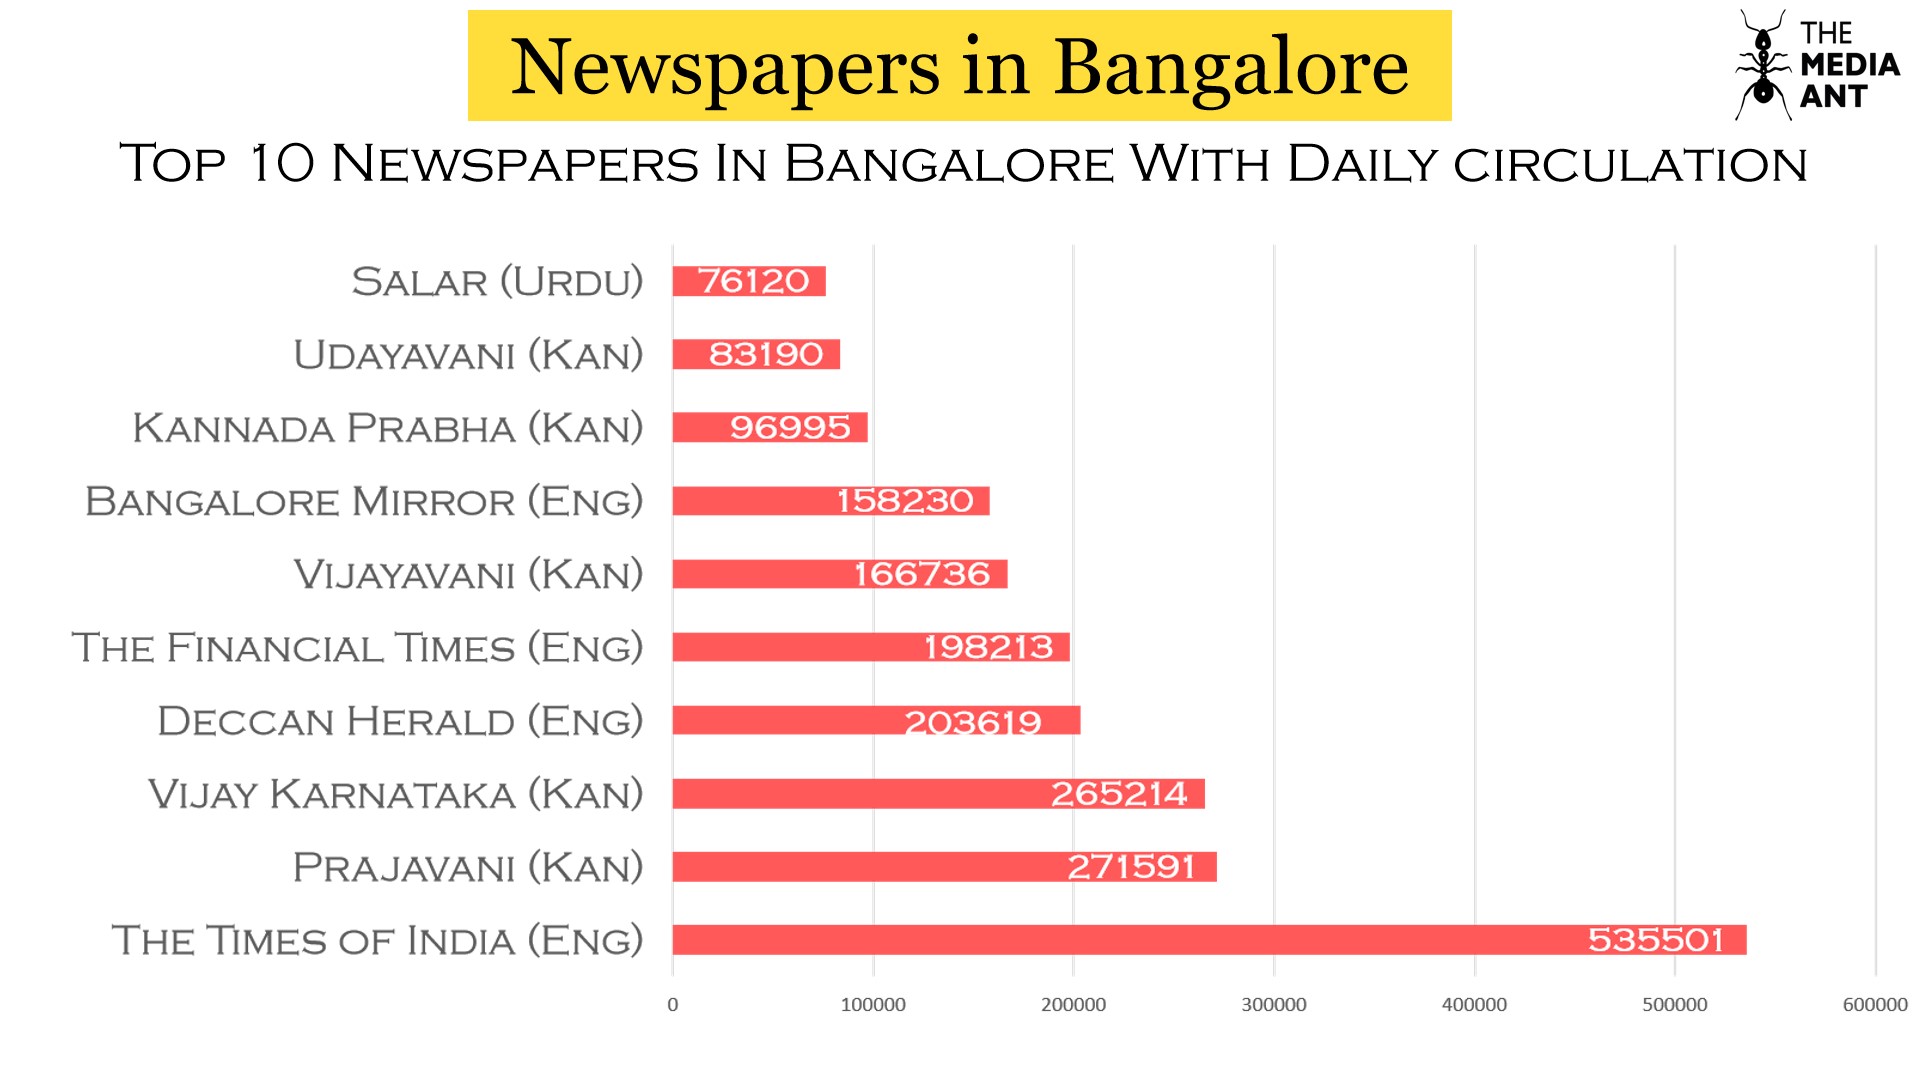 Top 10 Newspaper In Bangalore Daily Circulation Wise